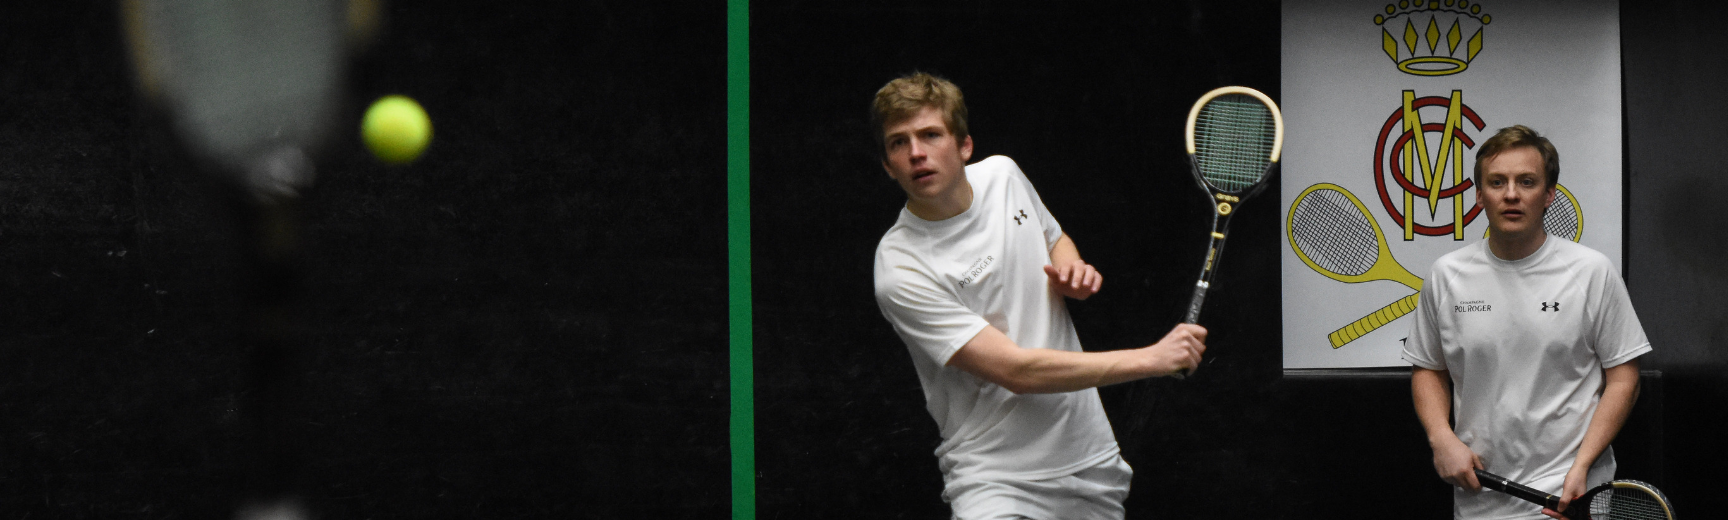 Two men playing real tennis with wooden rackets